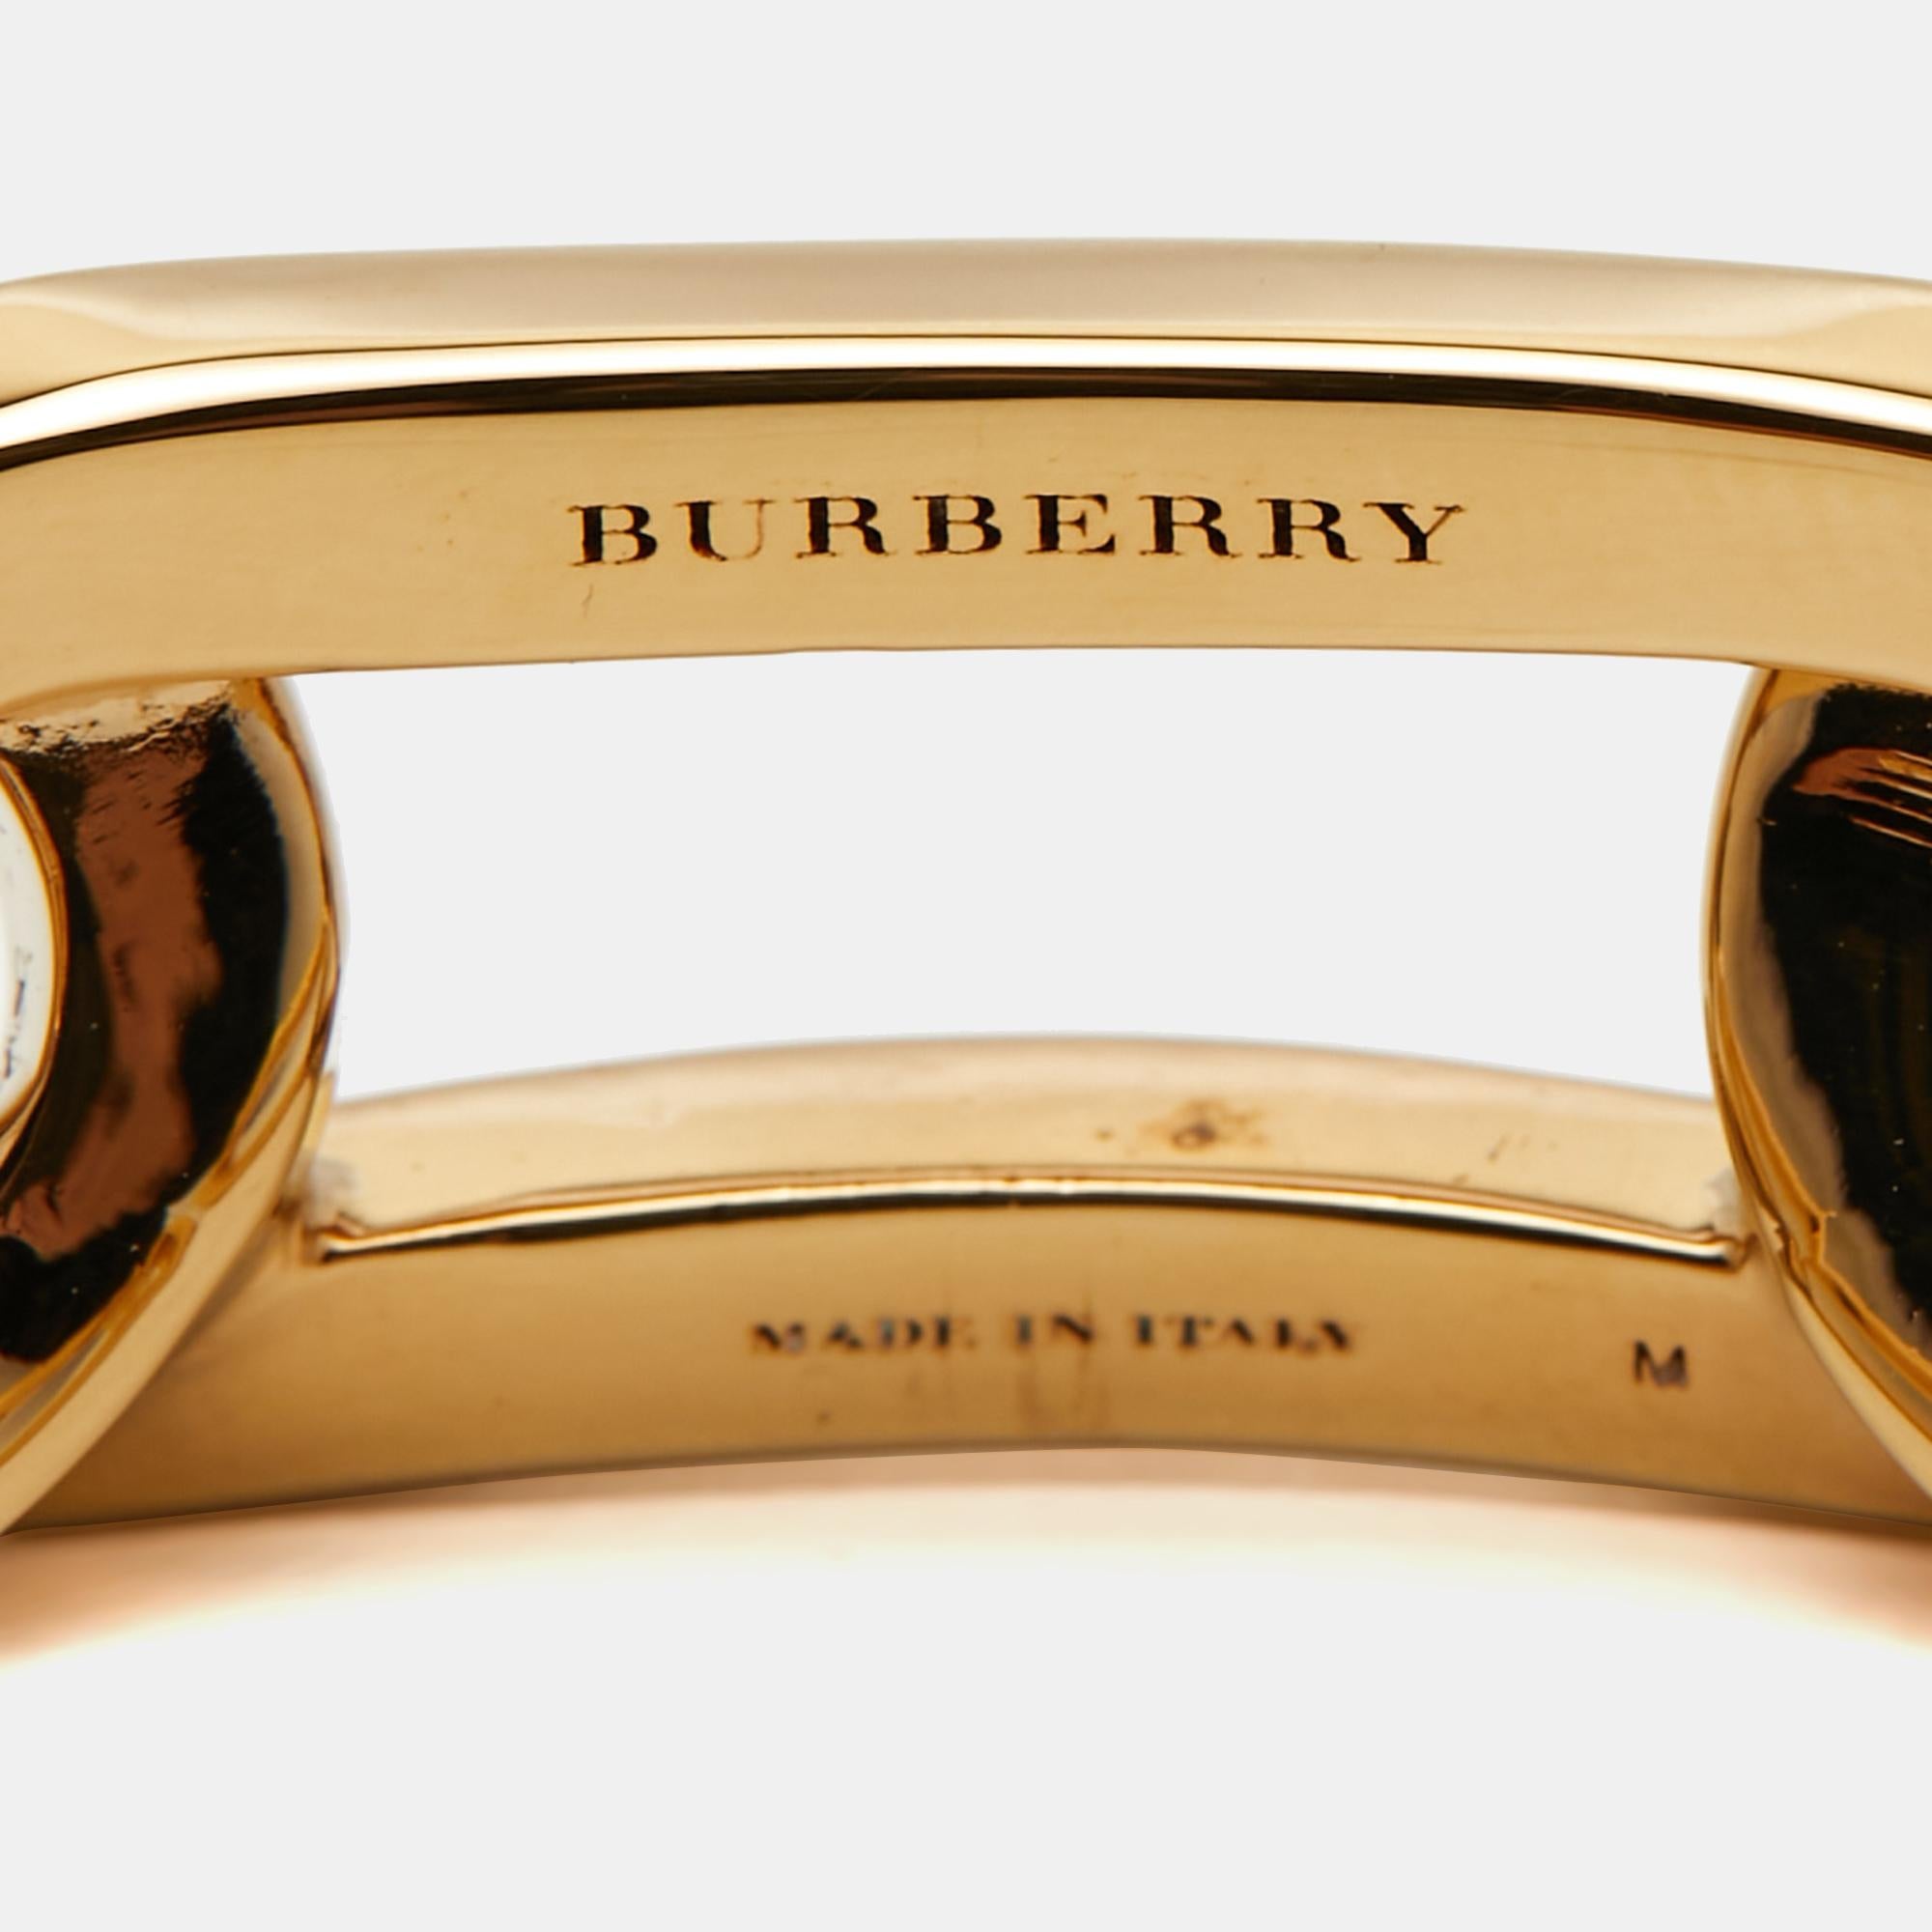 This beautiful Burberry chain link cuff bracelet is sure to stand out when it sits on your wrist. Crafted with precision, the fine bracelet will be an investment you'll love.

Includes: Brand Tag